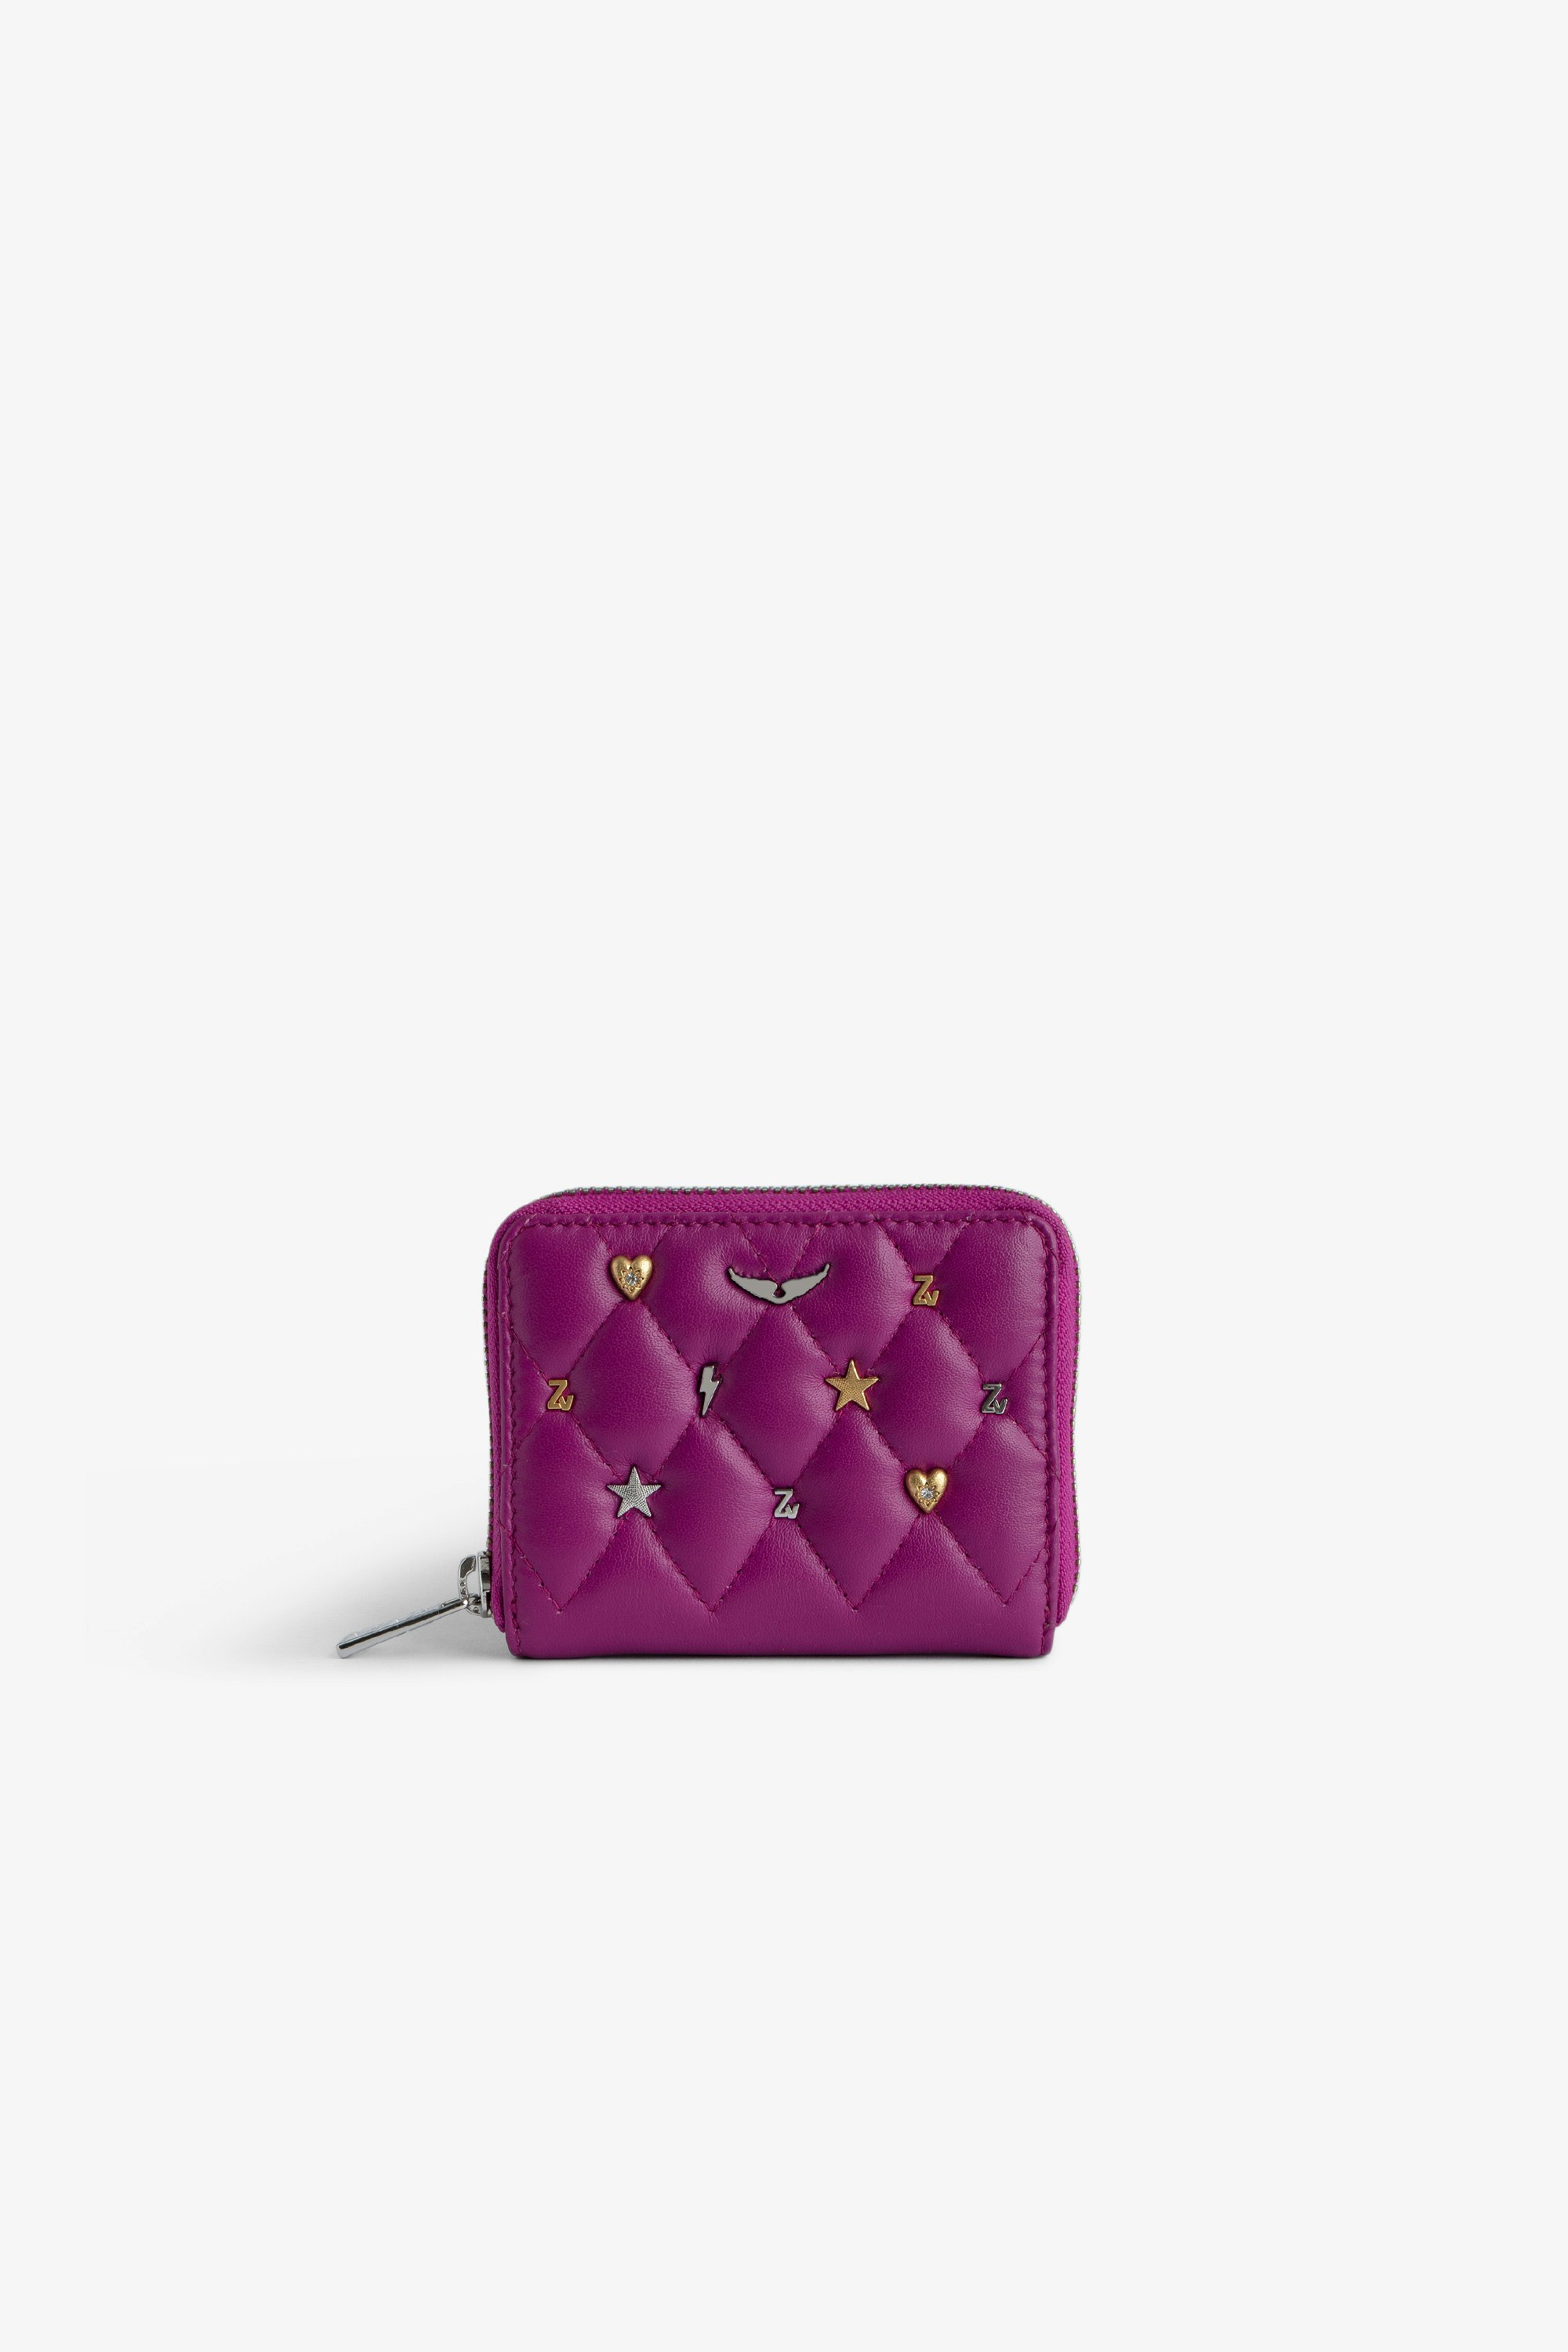 Mini ZV Coin Purse - Fuchsia smooth and quilted leather coin purse with lucky charms.